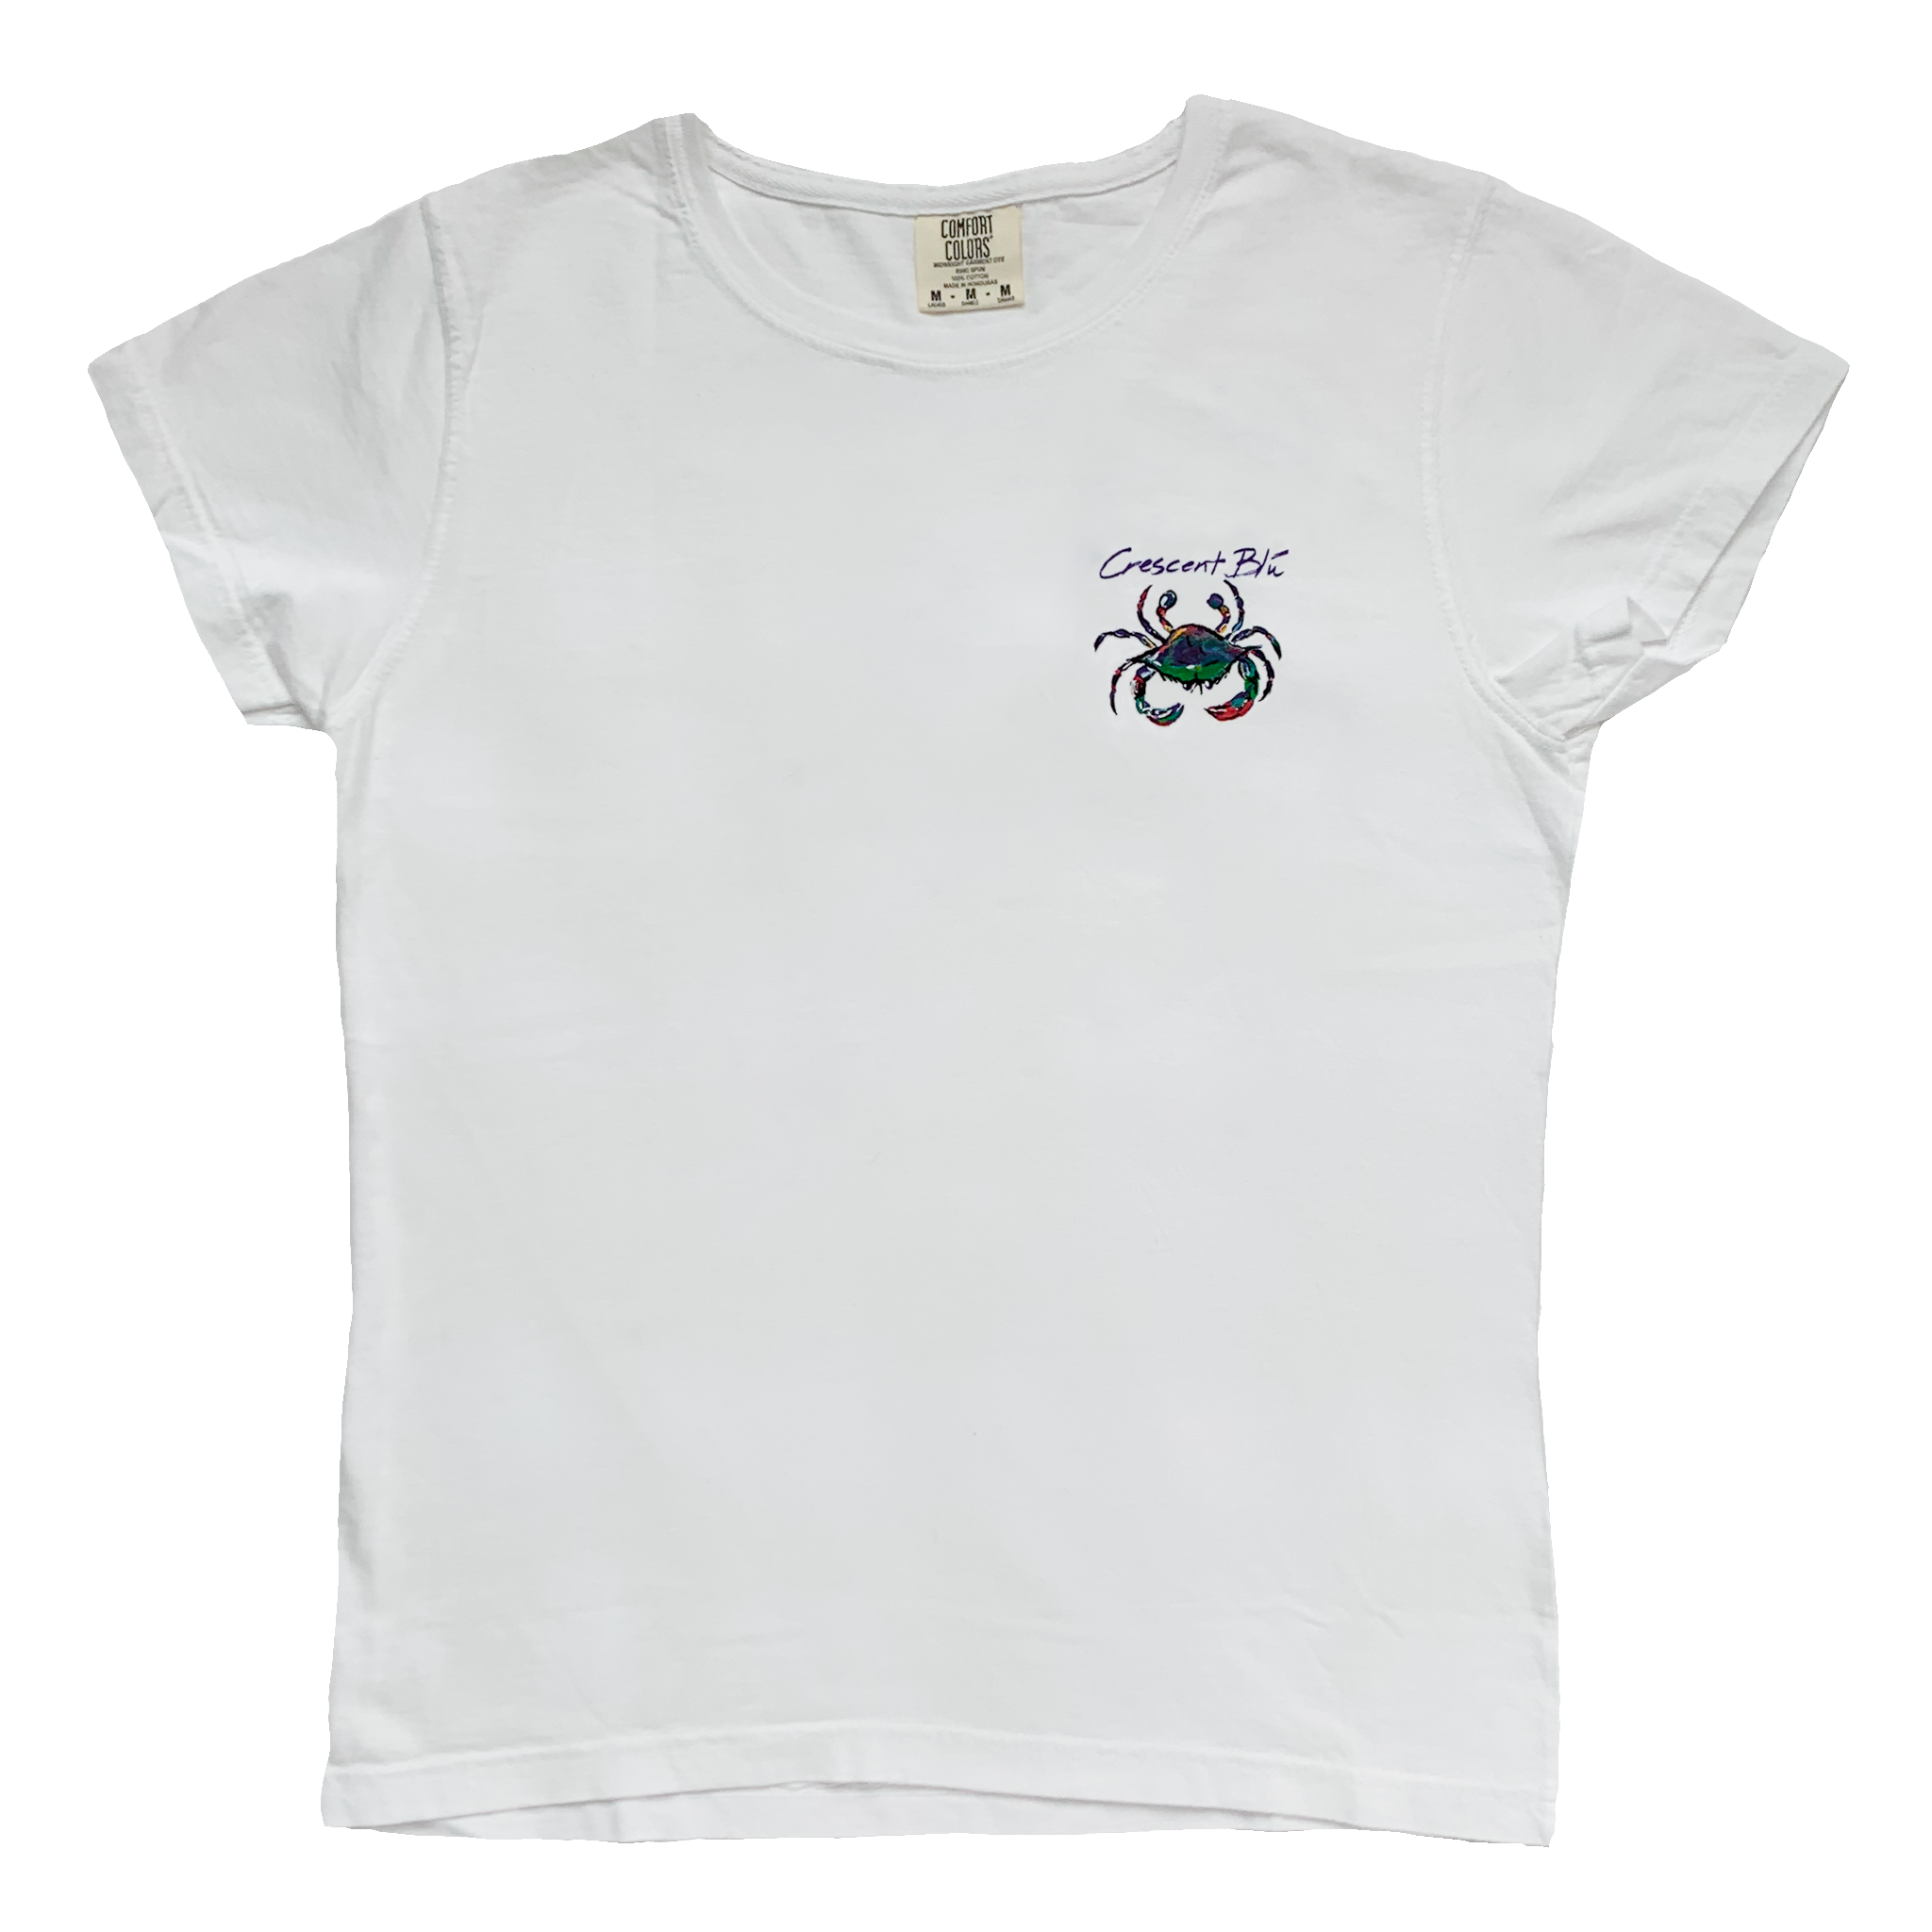 White ladies short sleeve tee with "Crescent Blú"  written above a blue crab.